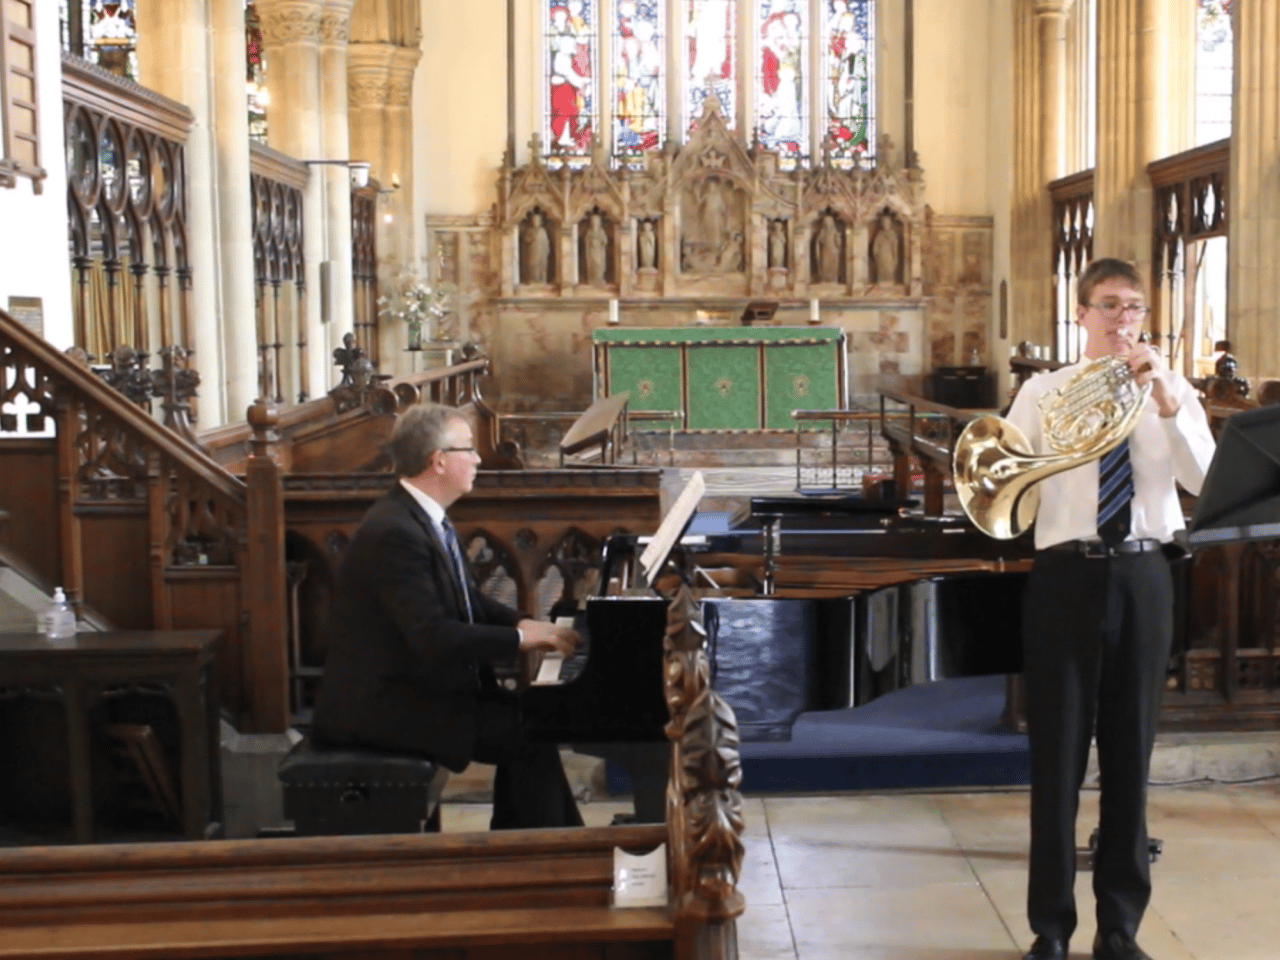 Oakham School student playing the horn accompanied on piano